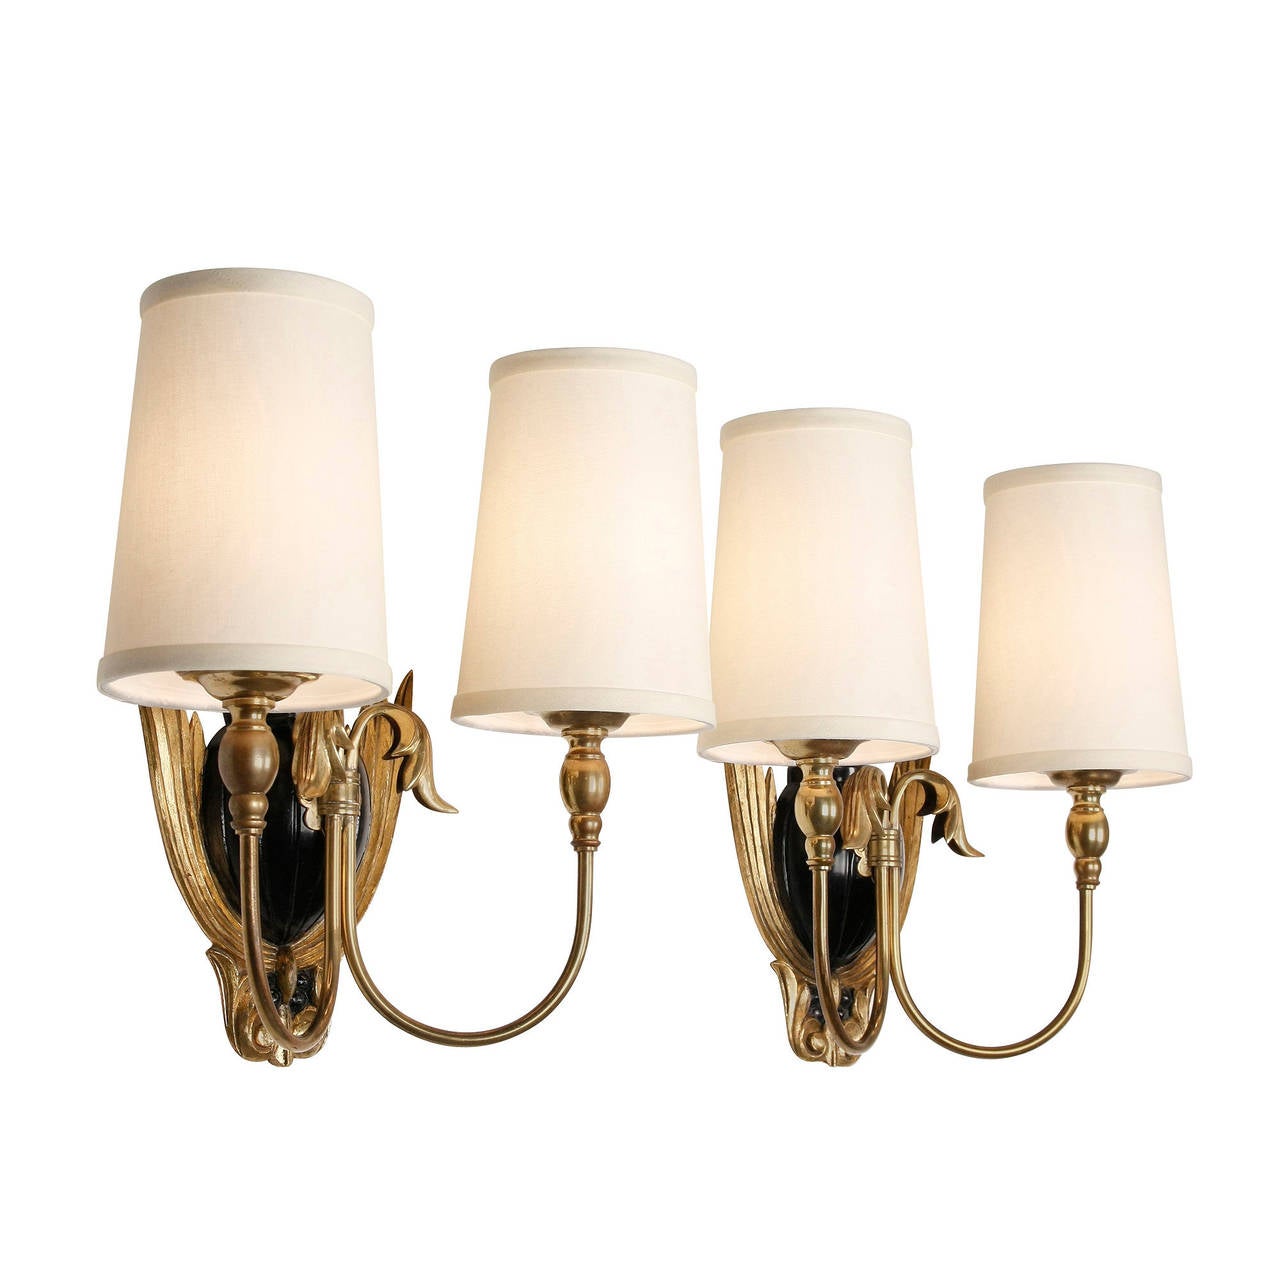 Mid-20th Century Pair of Carved Giltwood Wall Sconces, French, 1940s